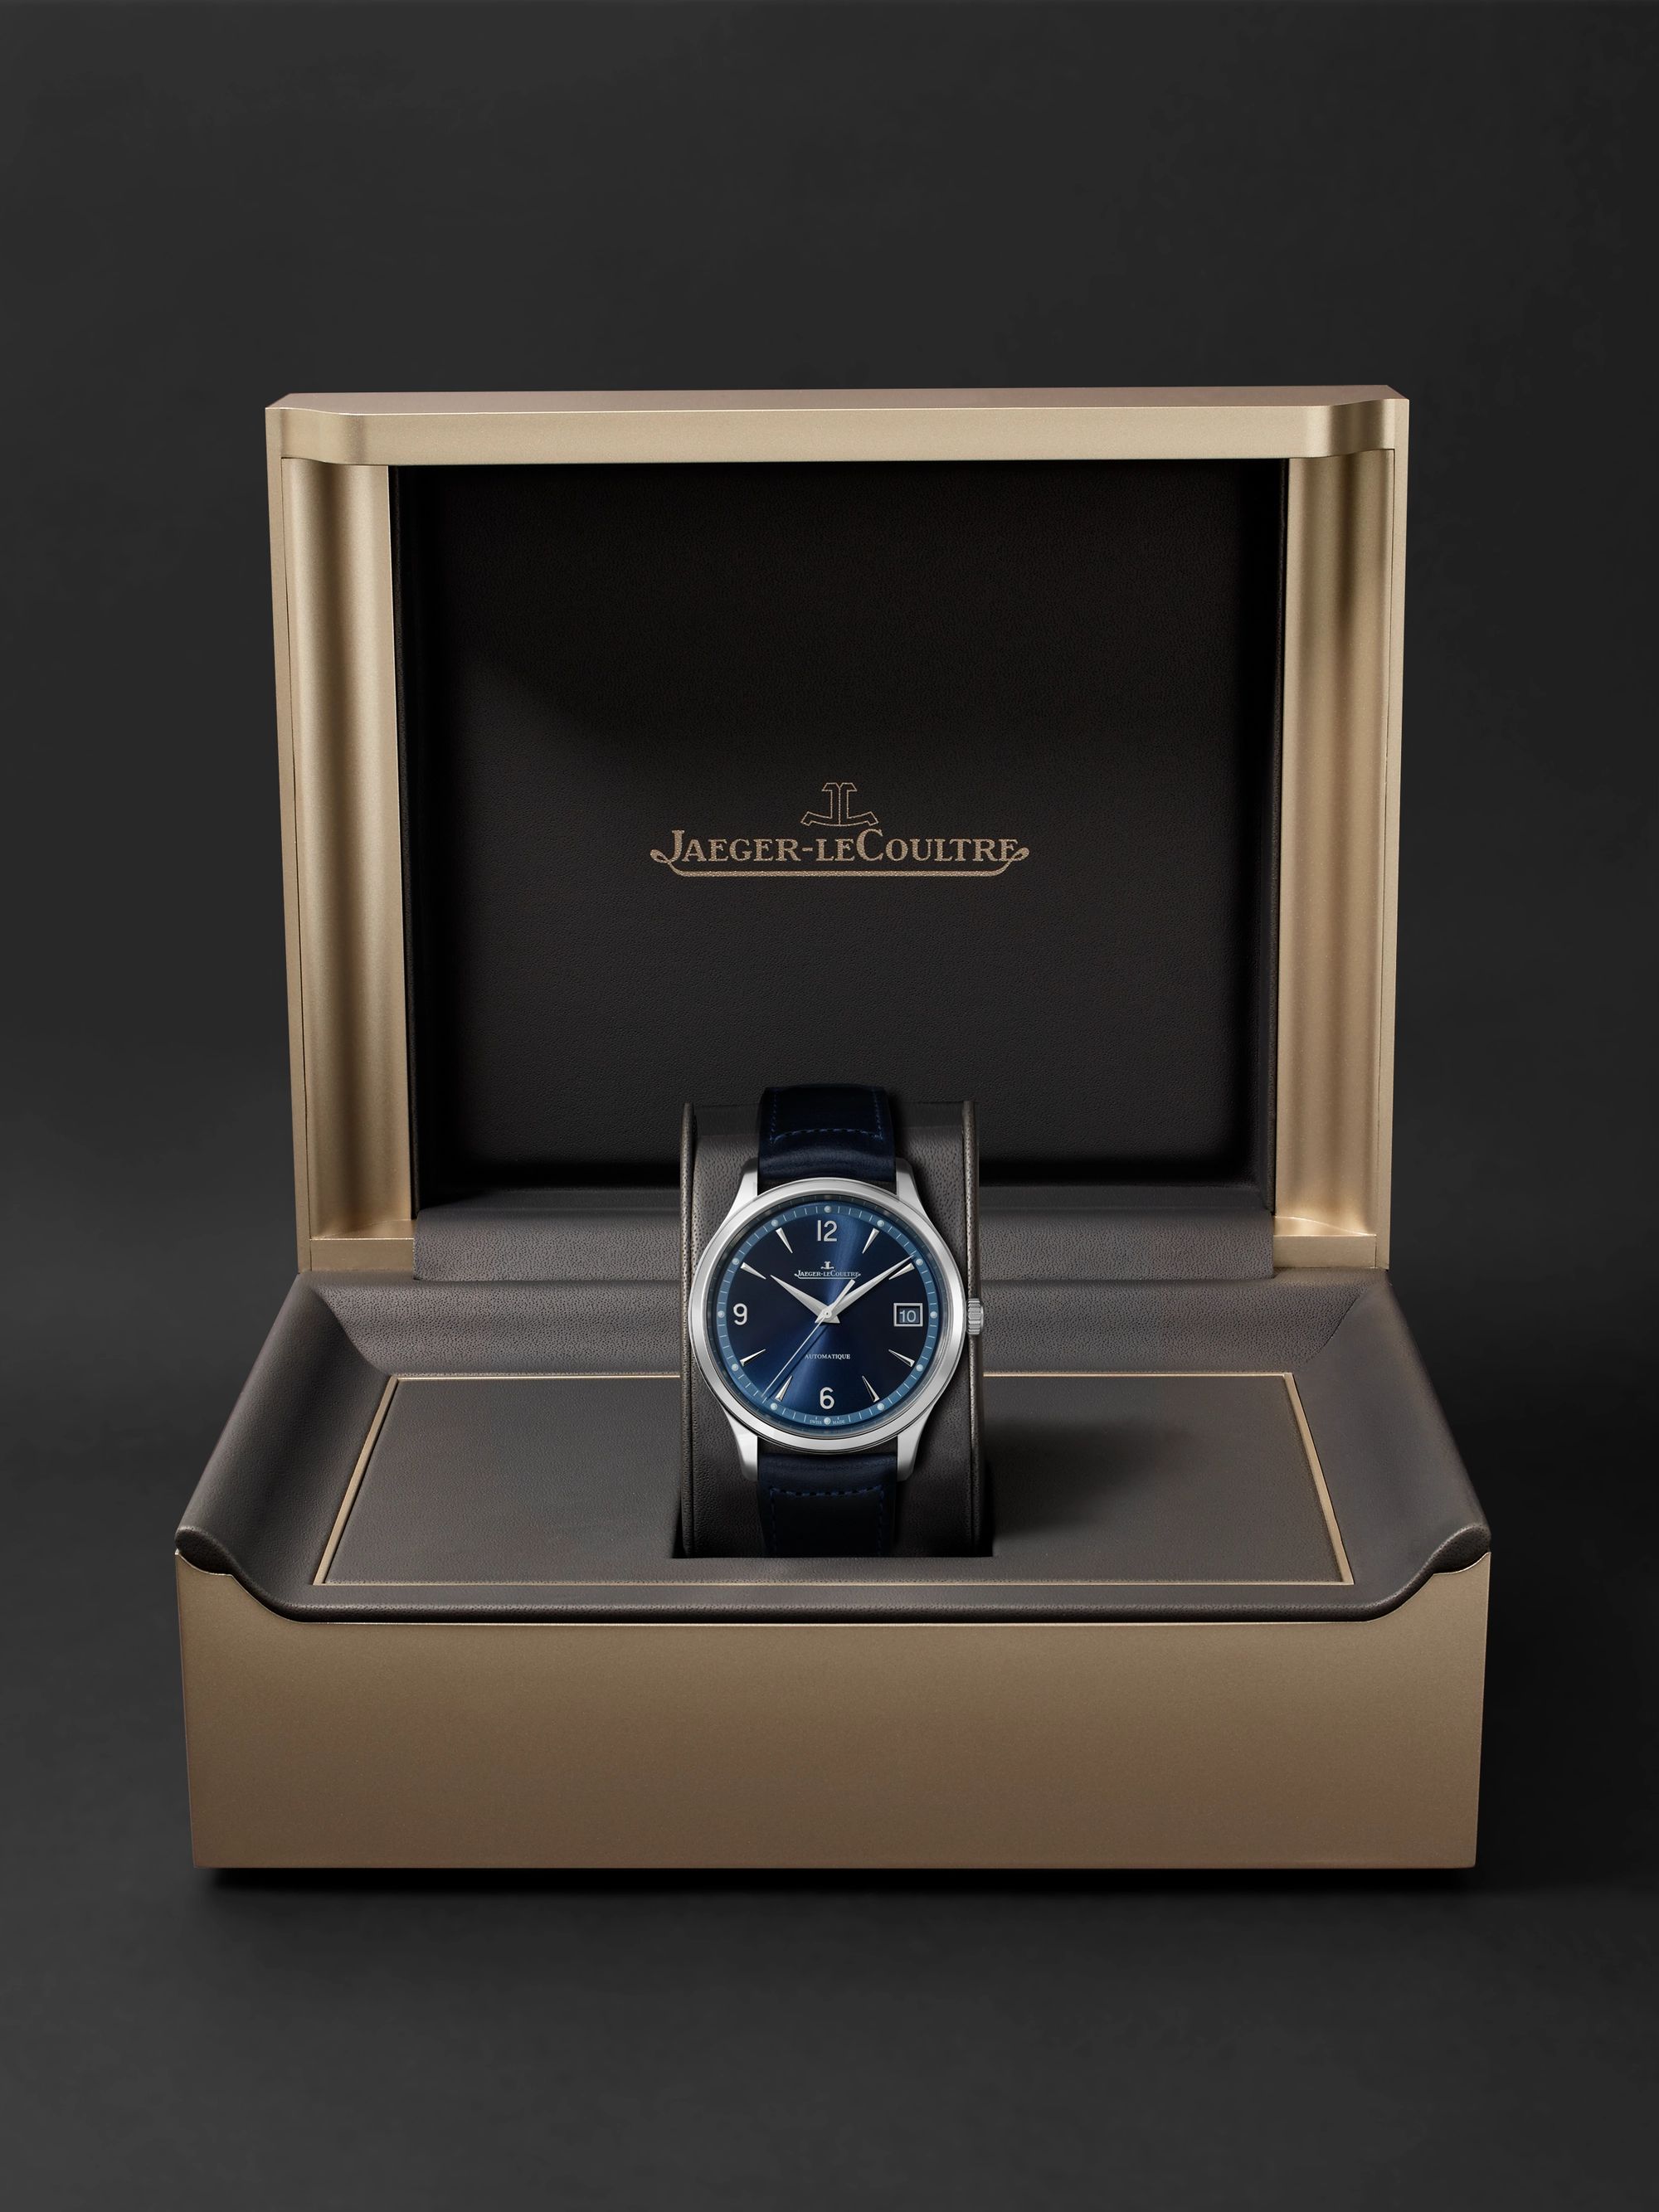 JAEGER-LECOULTRE Master Control Date Limited Edition Automatic 40mm Stainless Steel and Leather Watch, Ref No. Q4018480